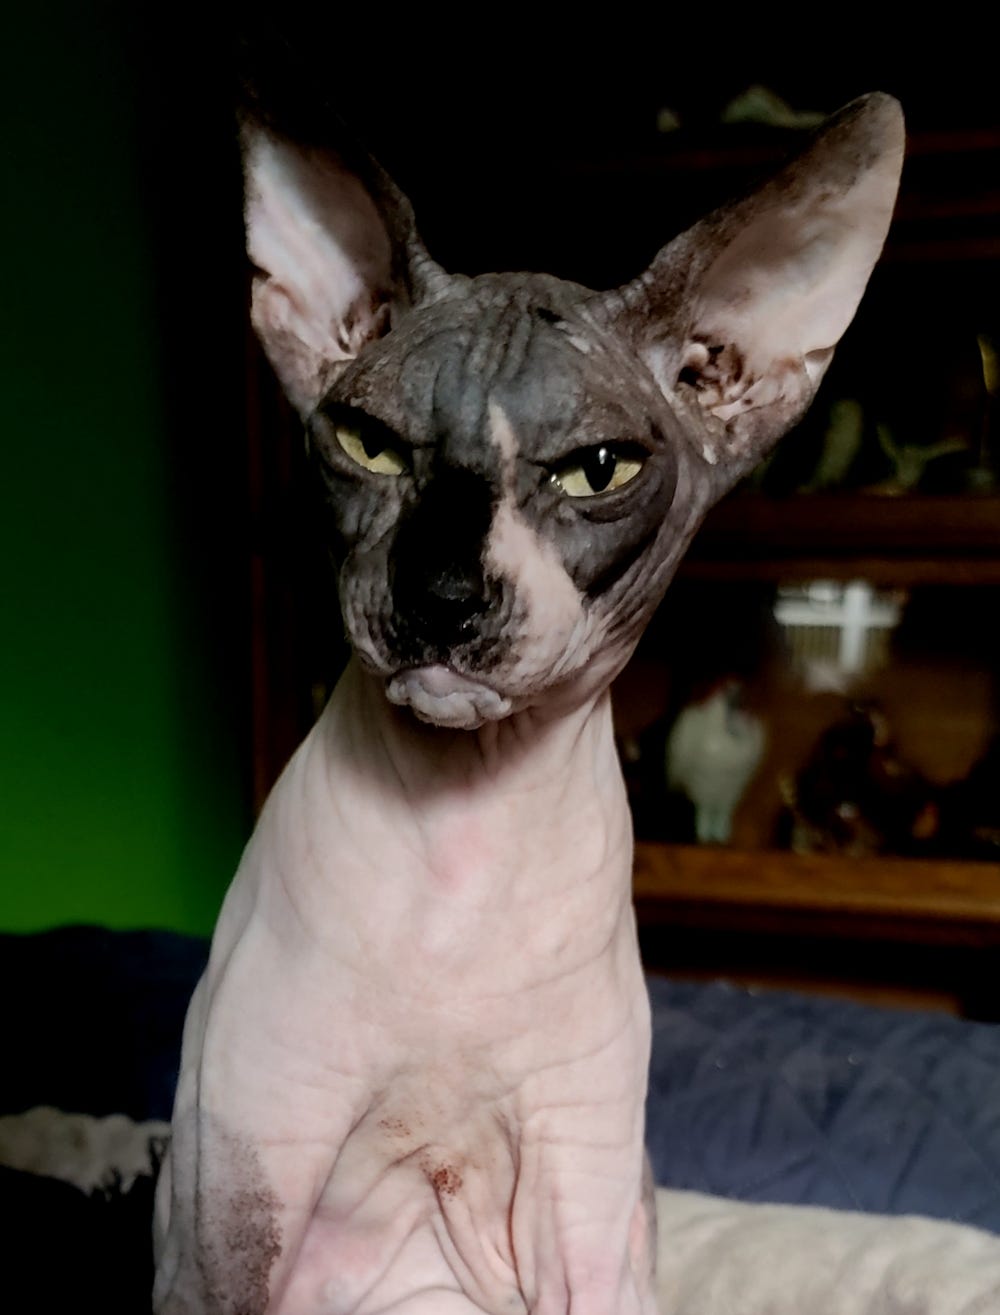 Angry looking grey and white sphynx cat.